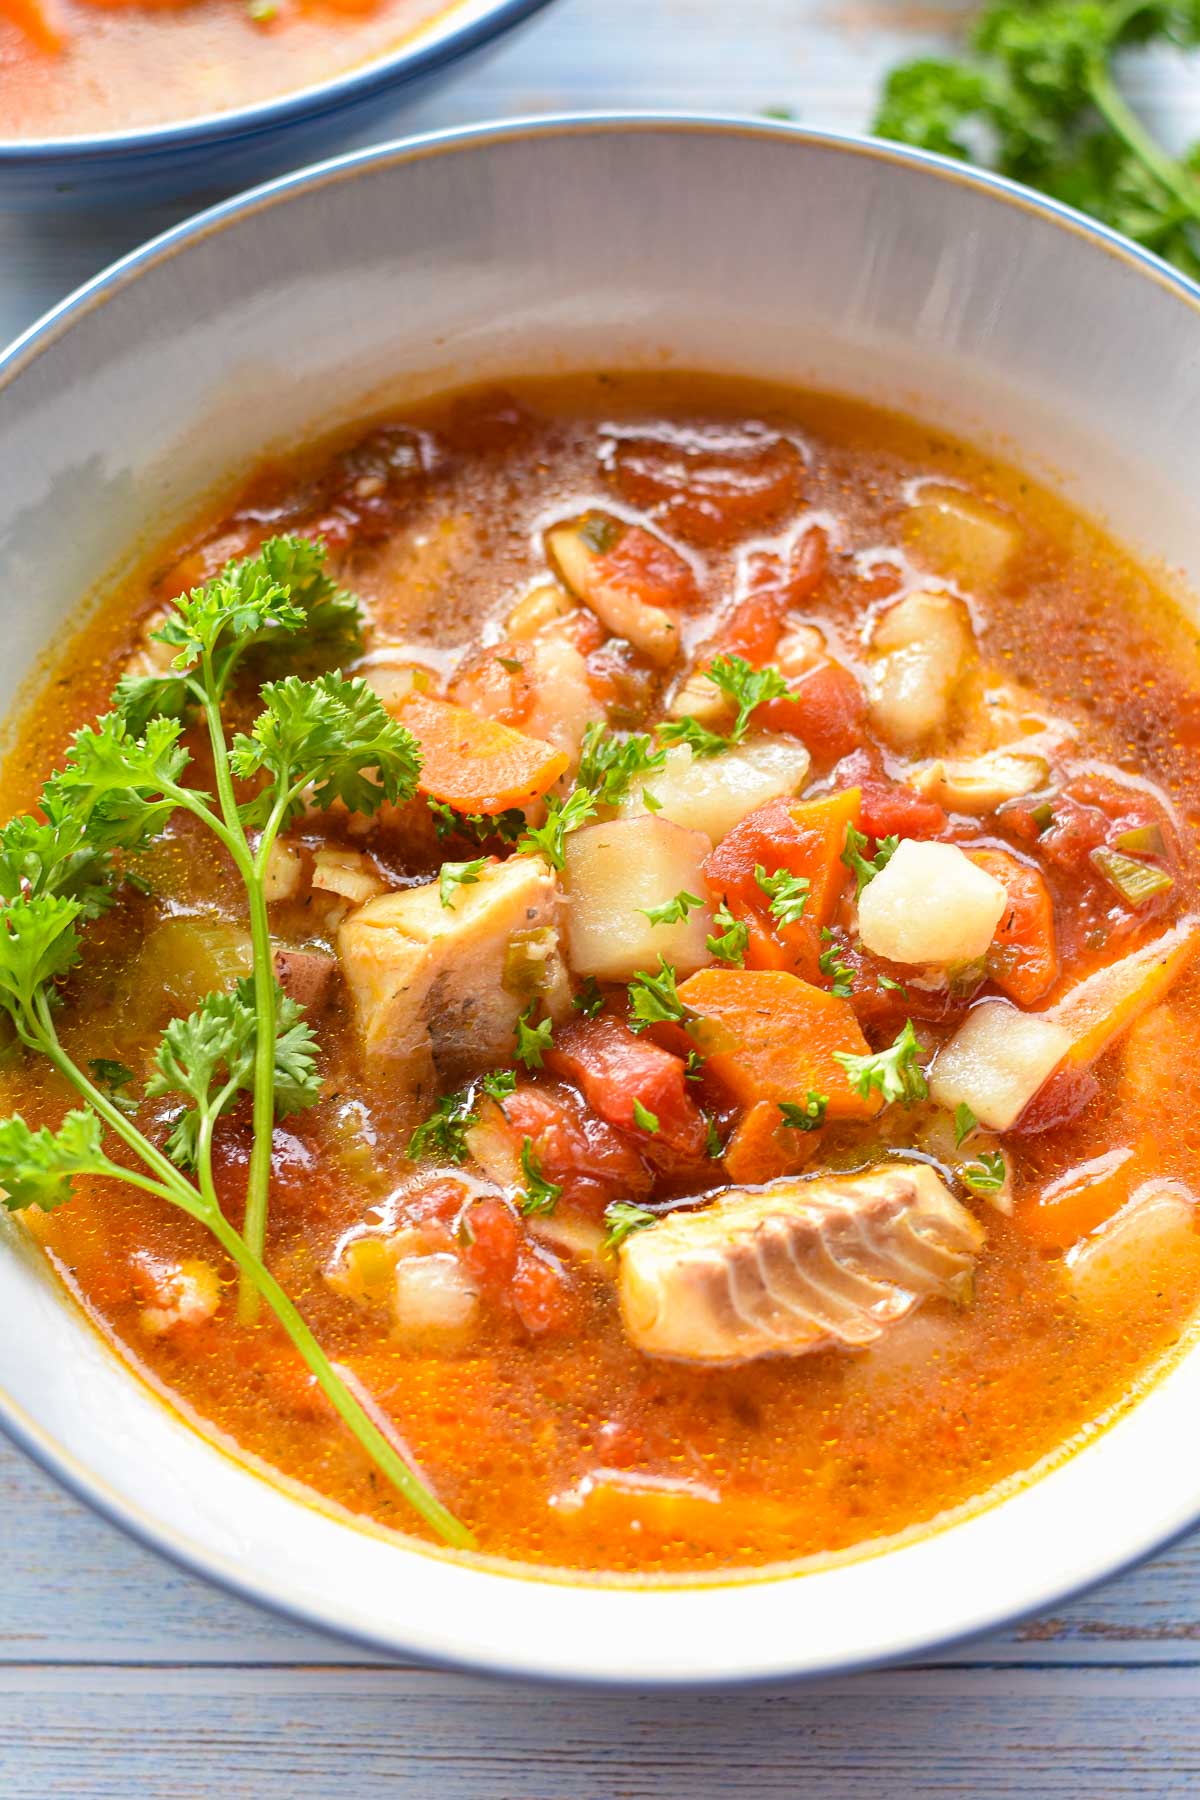 close up of Mediterranean style fish stew in a blue rimmed bowl with white fish, tomatoes, carrots, and potatoes.